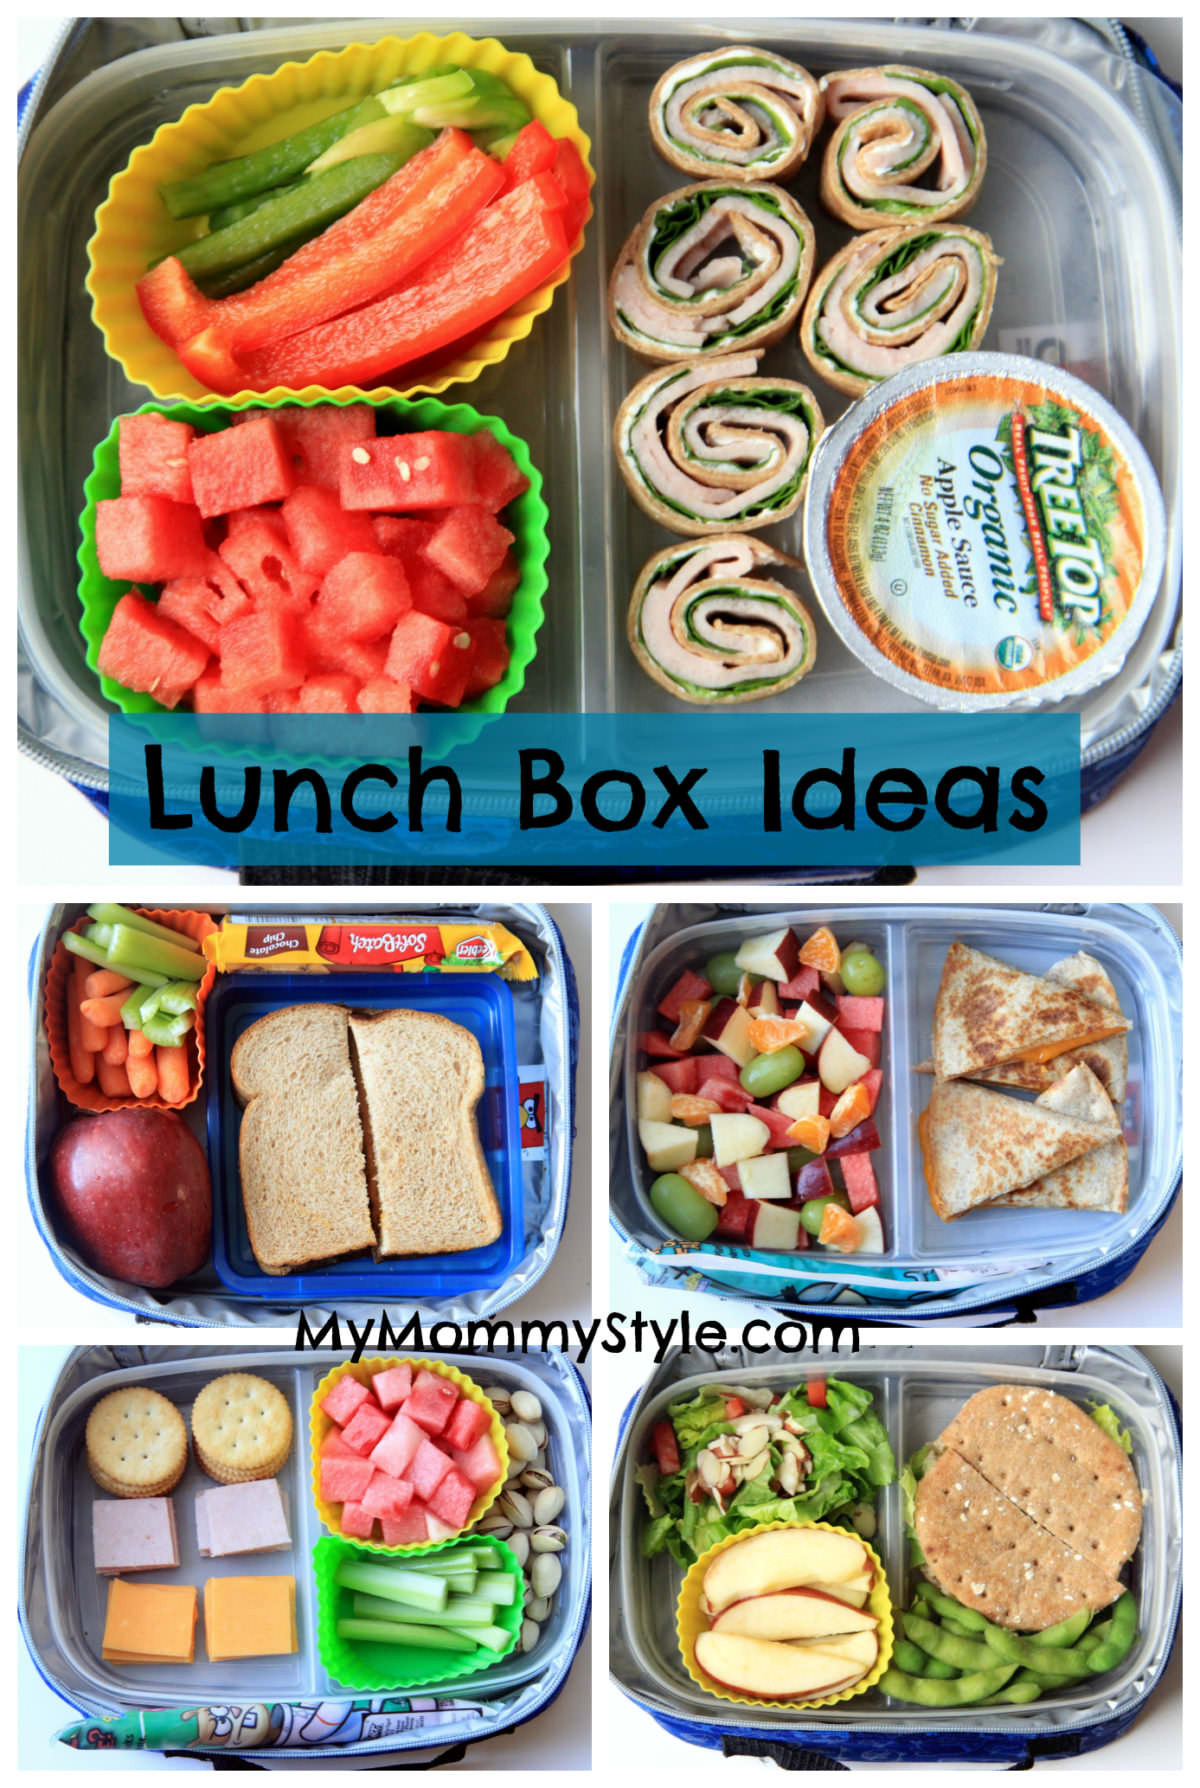 Healthy Lunches For Kids
 The best after school snacks for kids My Mommy Style